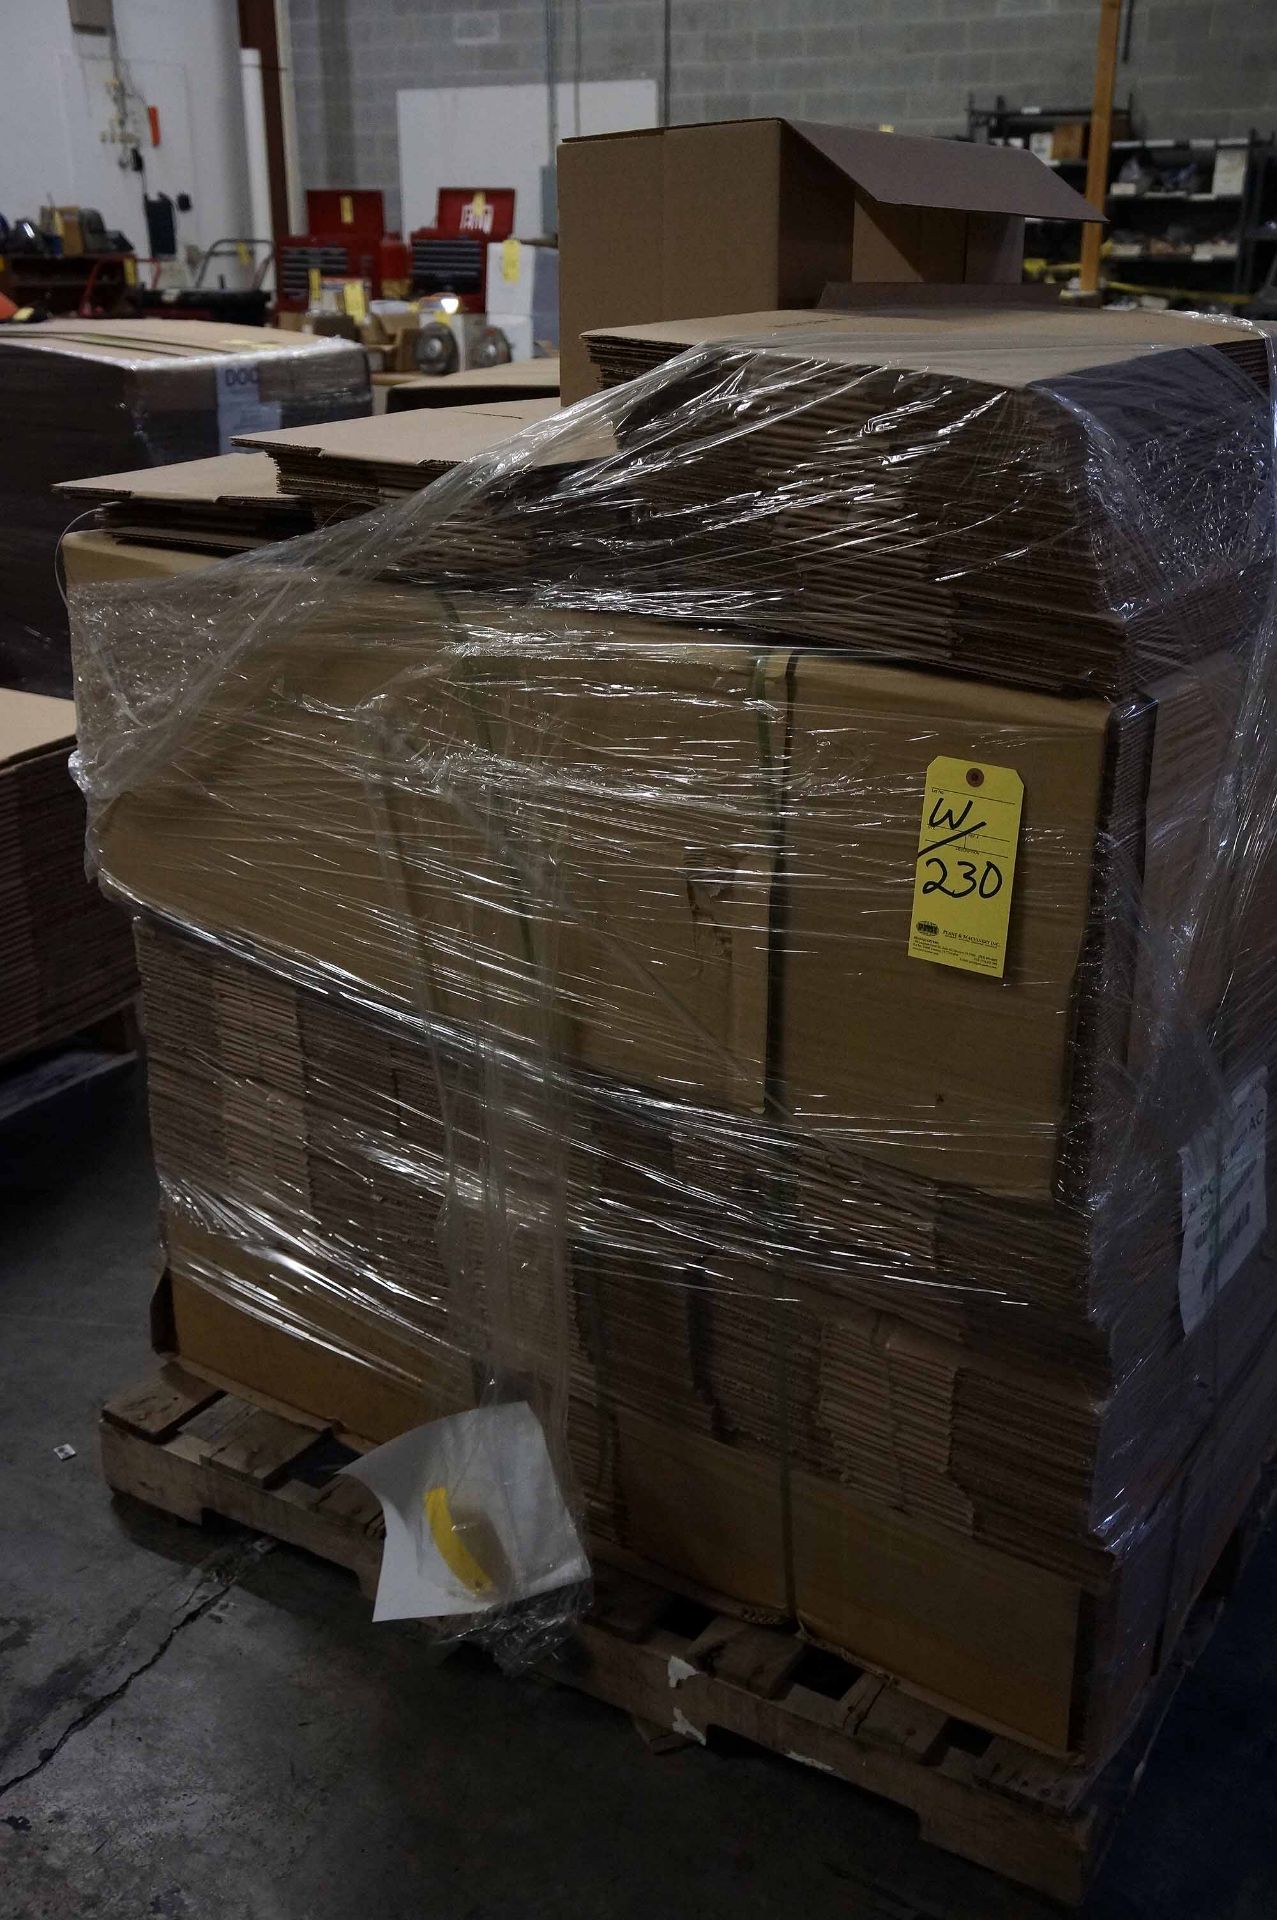 LOT OF CARDBOARD BOXES: 32-7/8" x 22-1/2" x 7-1/4" (one pallet), 20" x 10-1/4" x 5" (one pallet), - Image 3 of 8